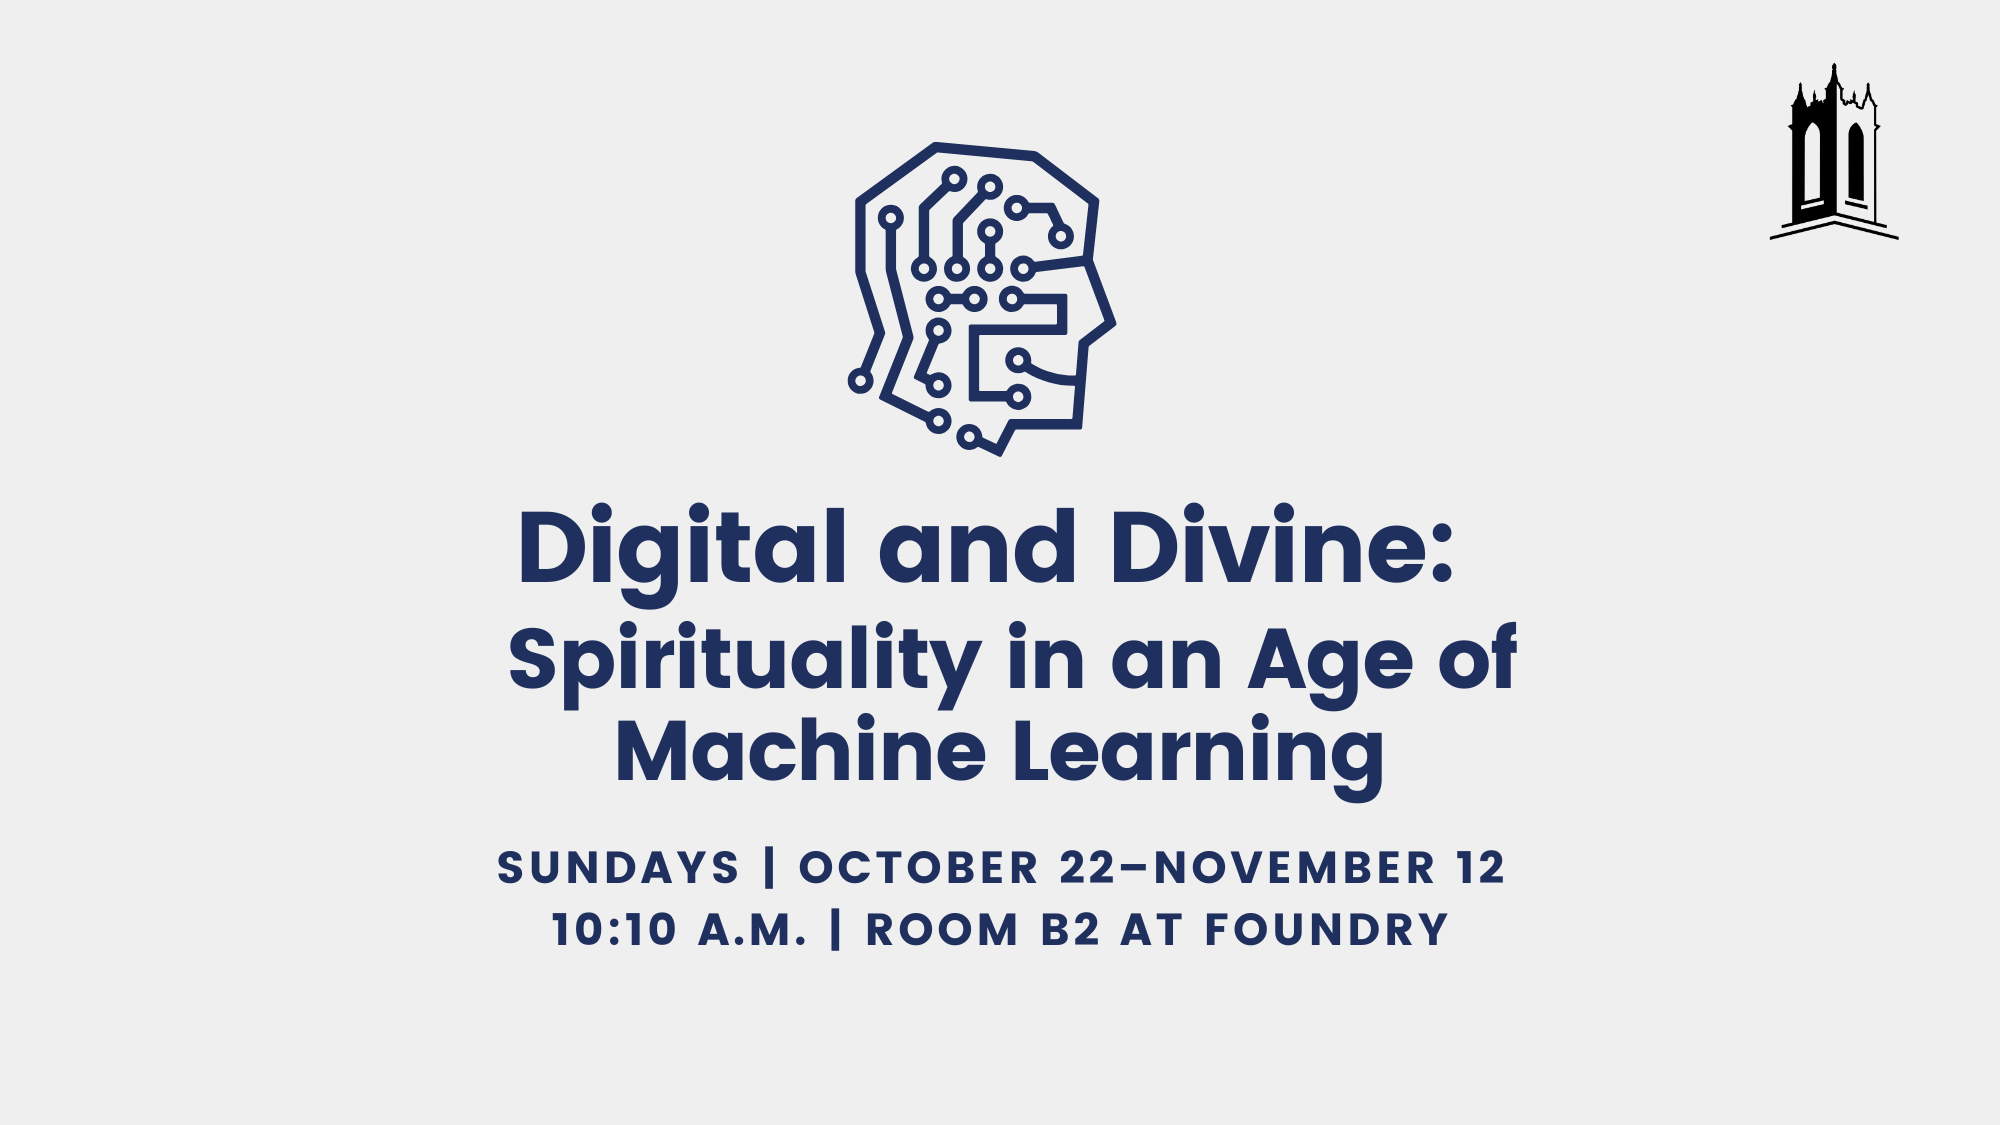 Digital and Divine: Spirituality in the Age of Machine Learning